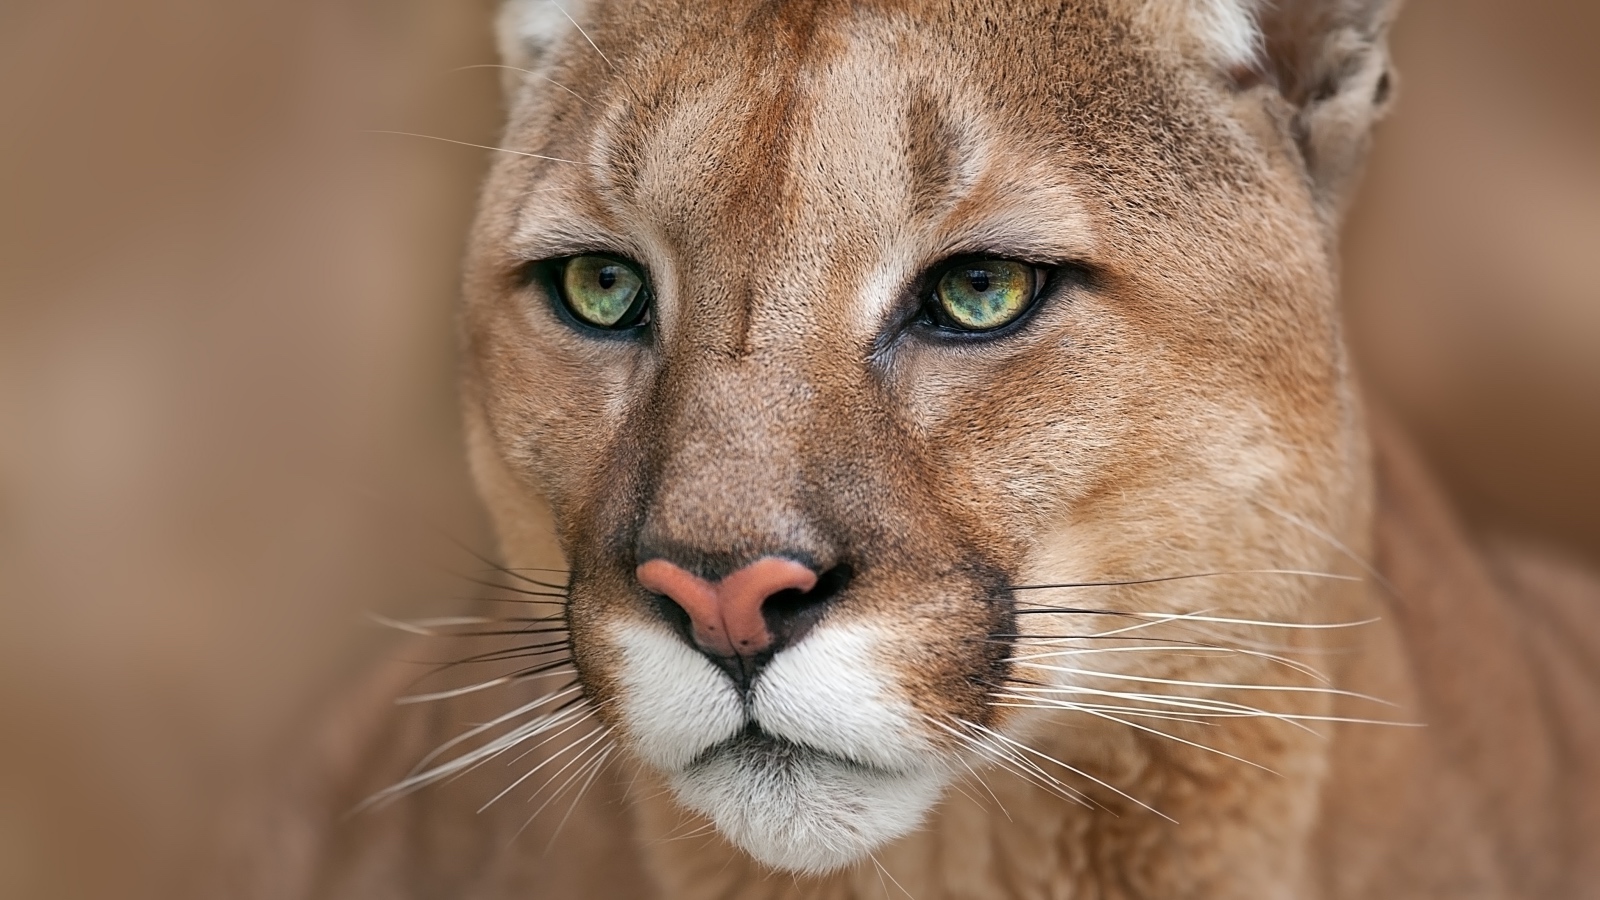 close up view of a mountain lion's face